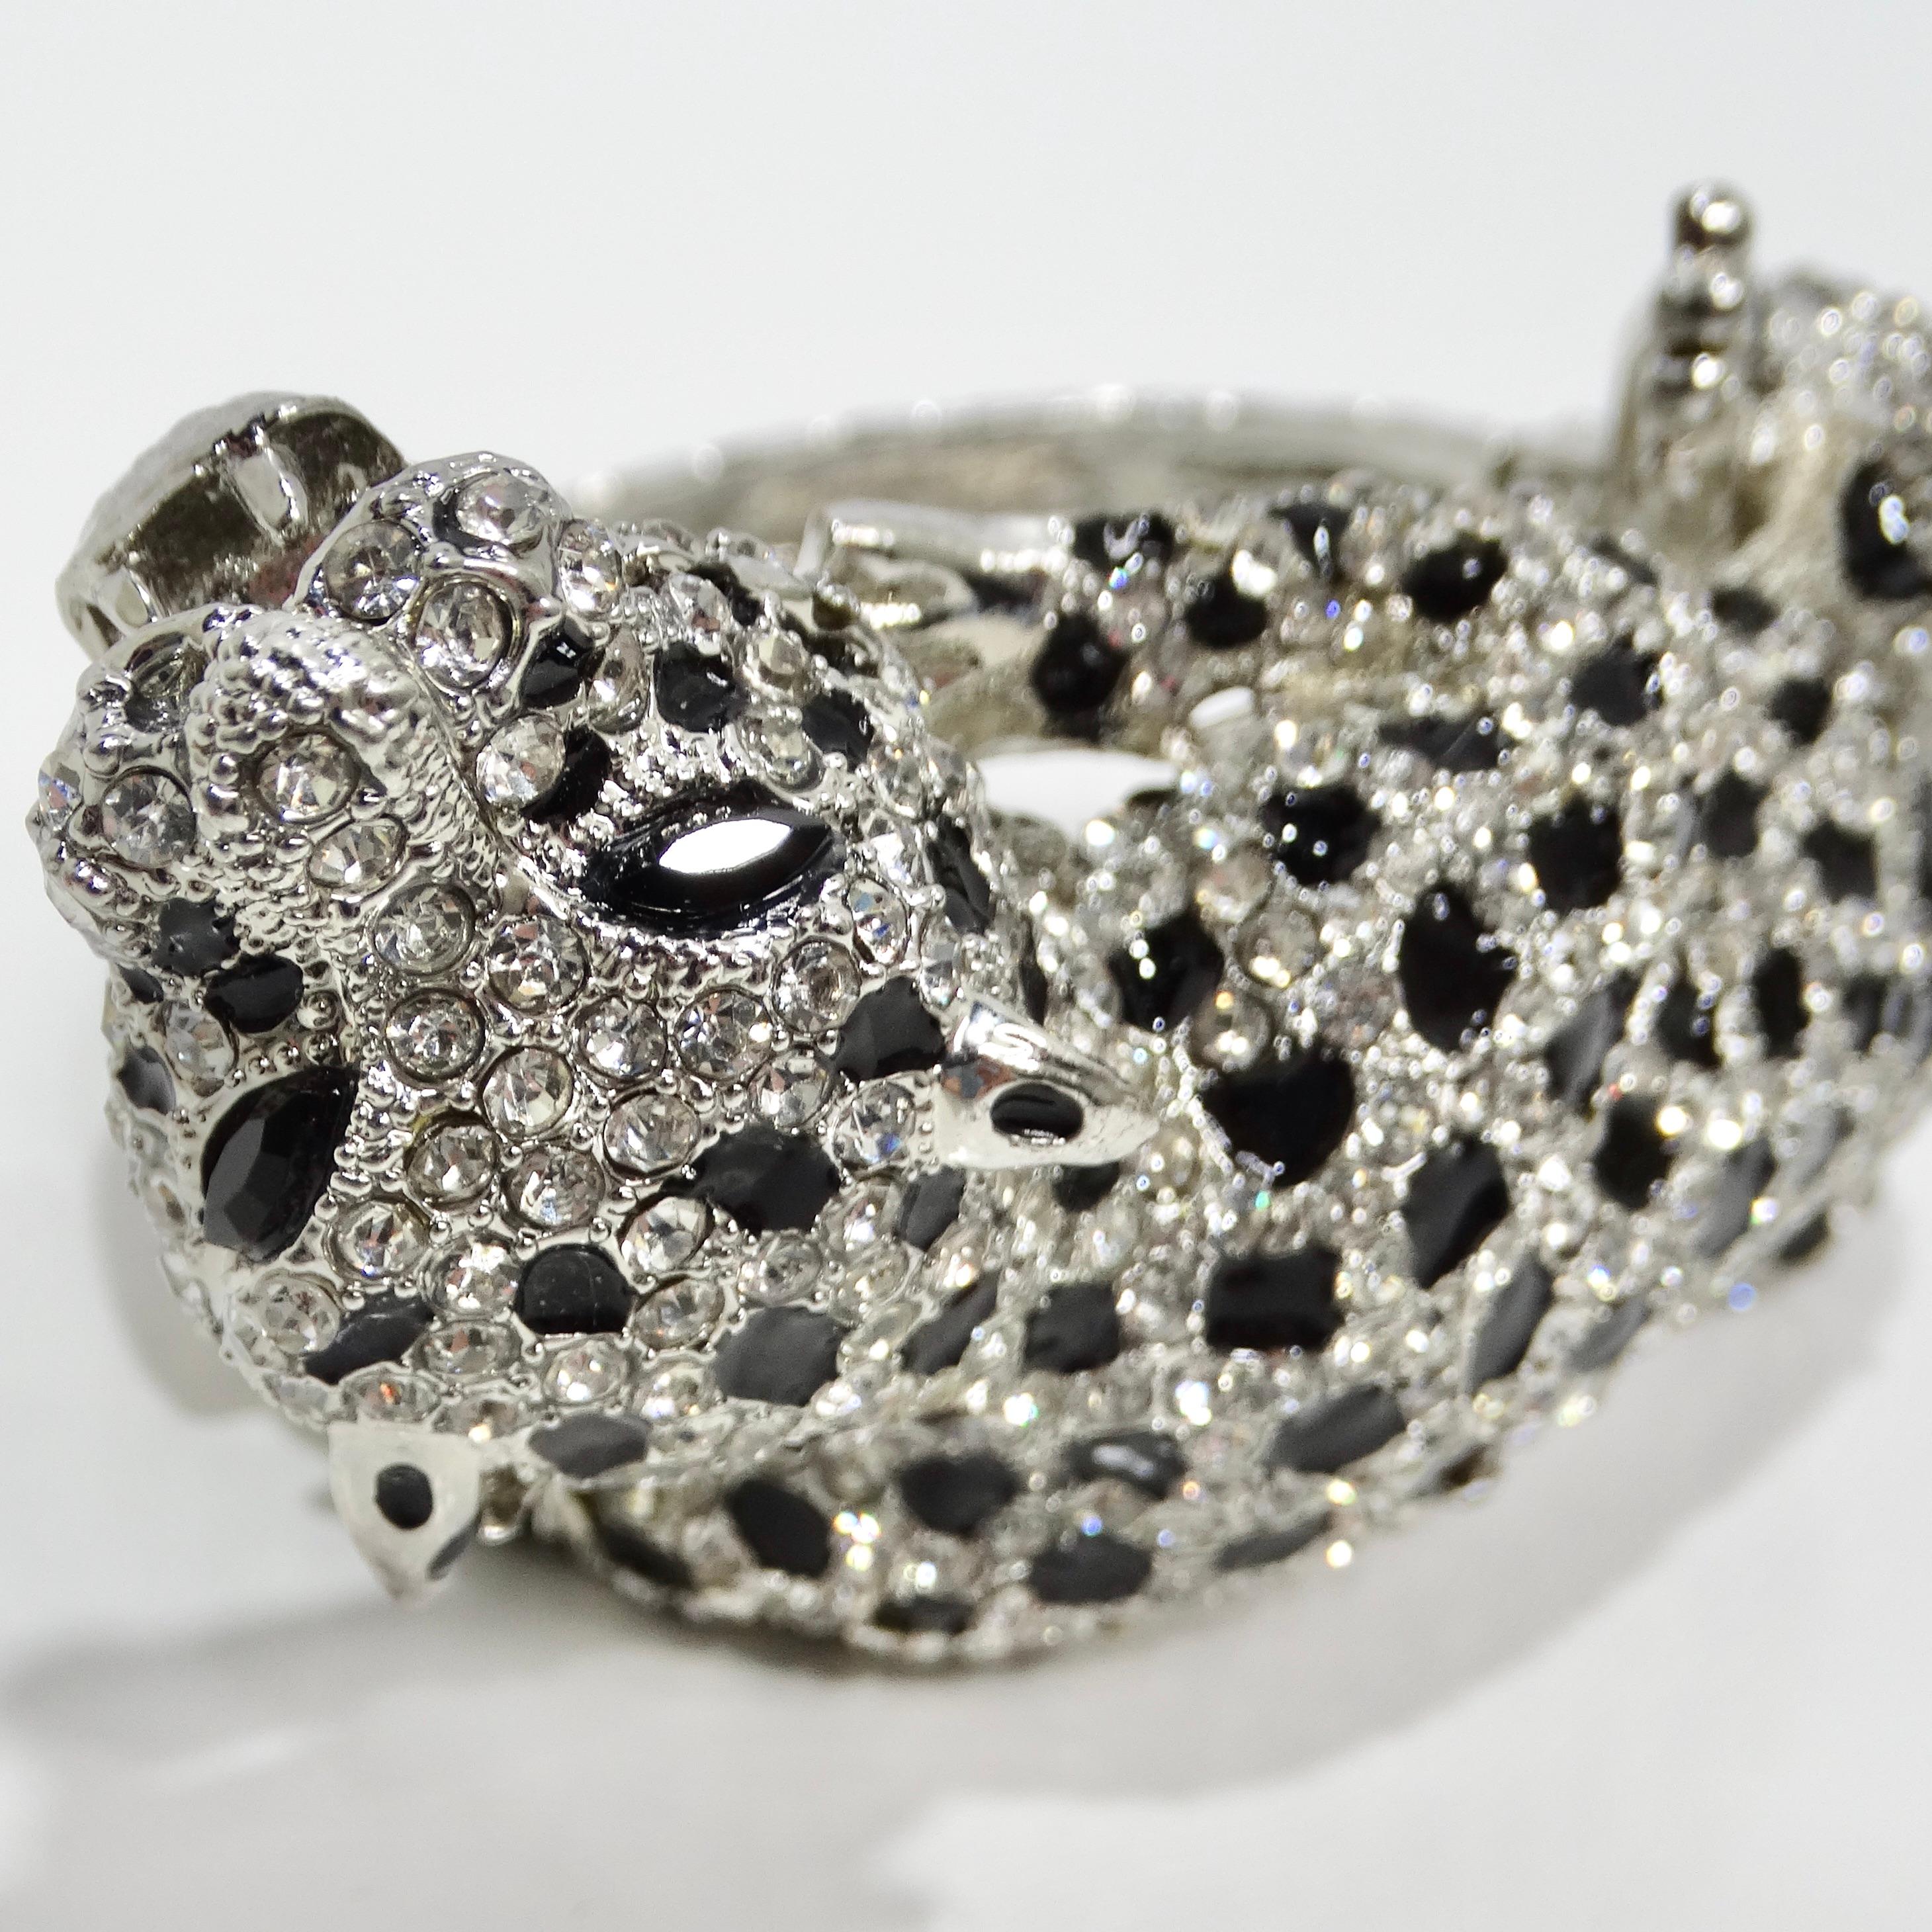 1990s Cartier Inspired Rhinestone Panther Cuff Bracelet In Excellent Condition For Sale In Scottsdale, AZ